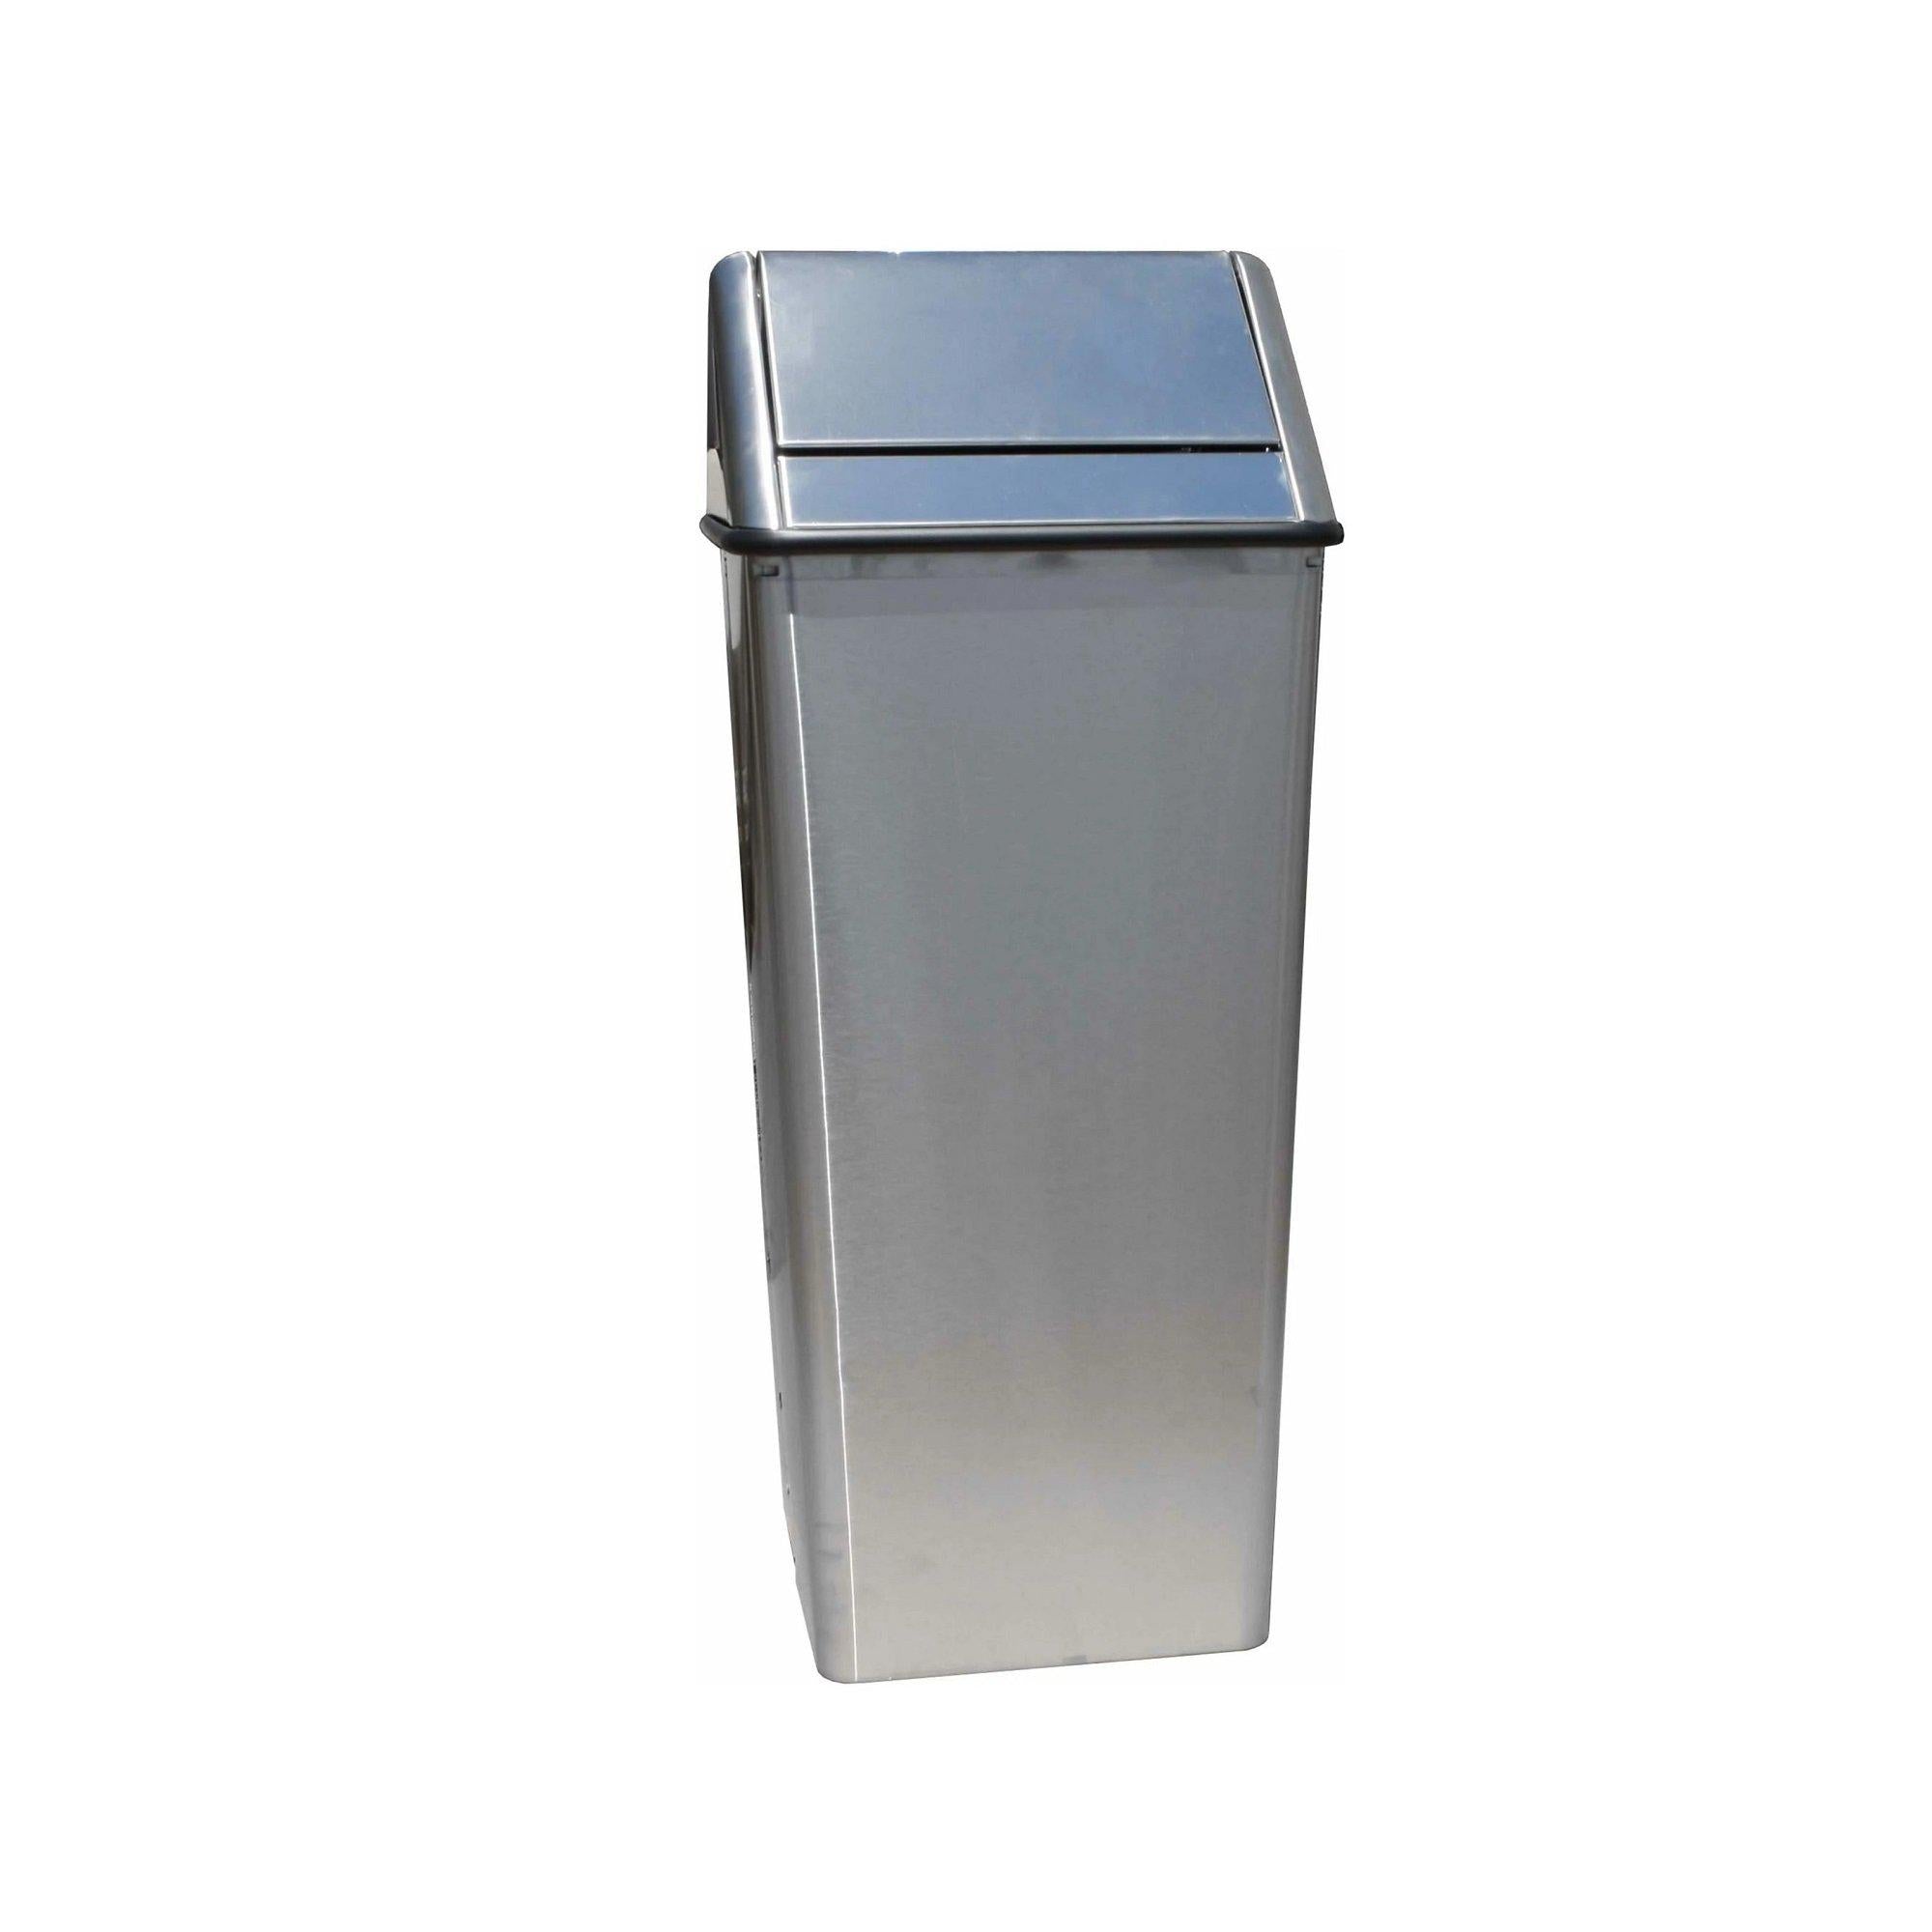 Waste Watcher Stainless Steel Swing Top Waste Receptacle, 21 Gallon Capacity